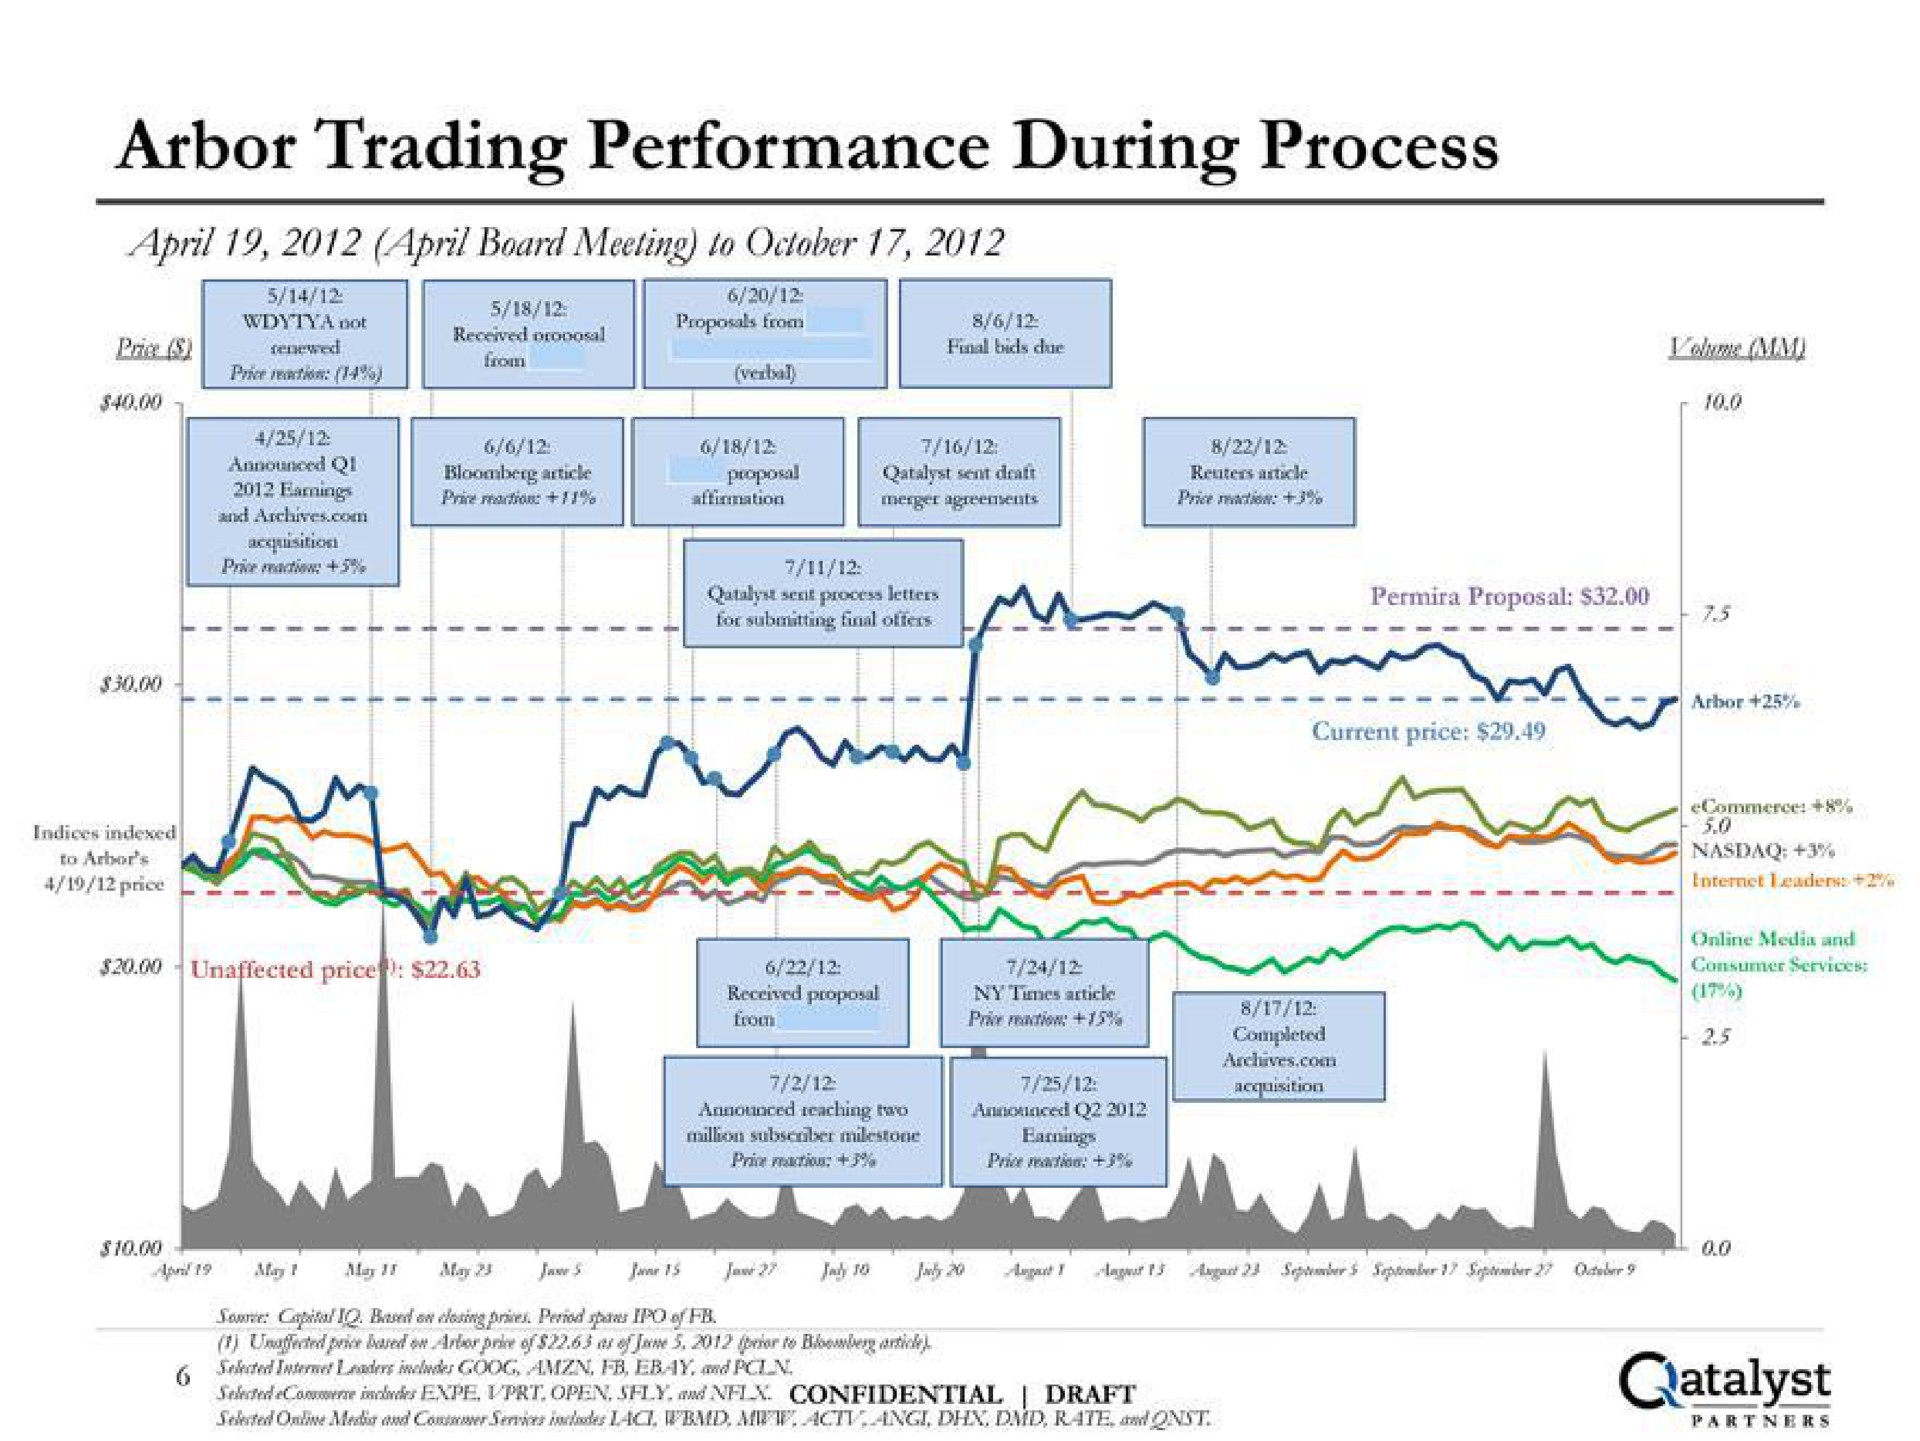 arbor trading performance during process board meeting to catalyst | Qatalyst Partners